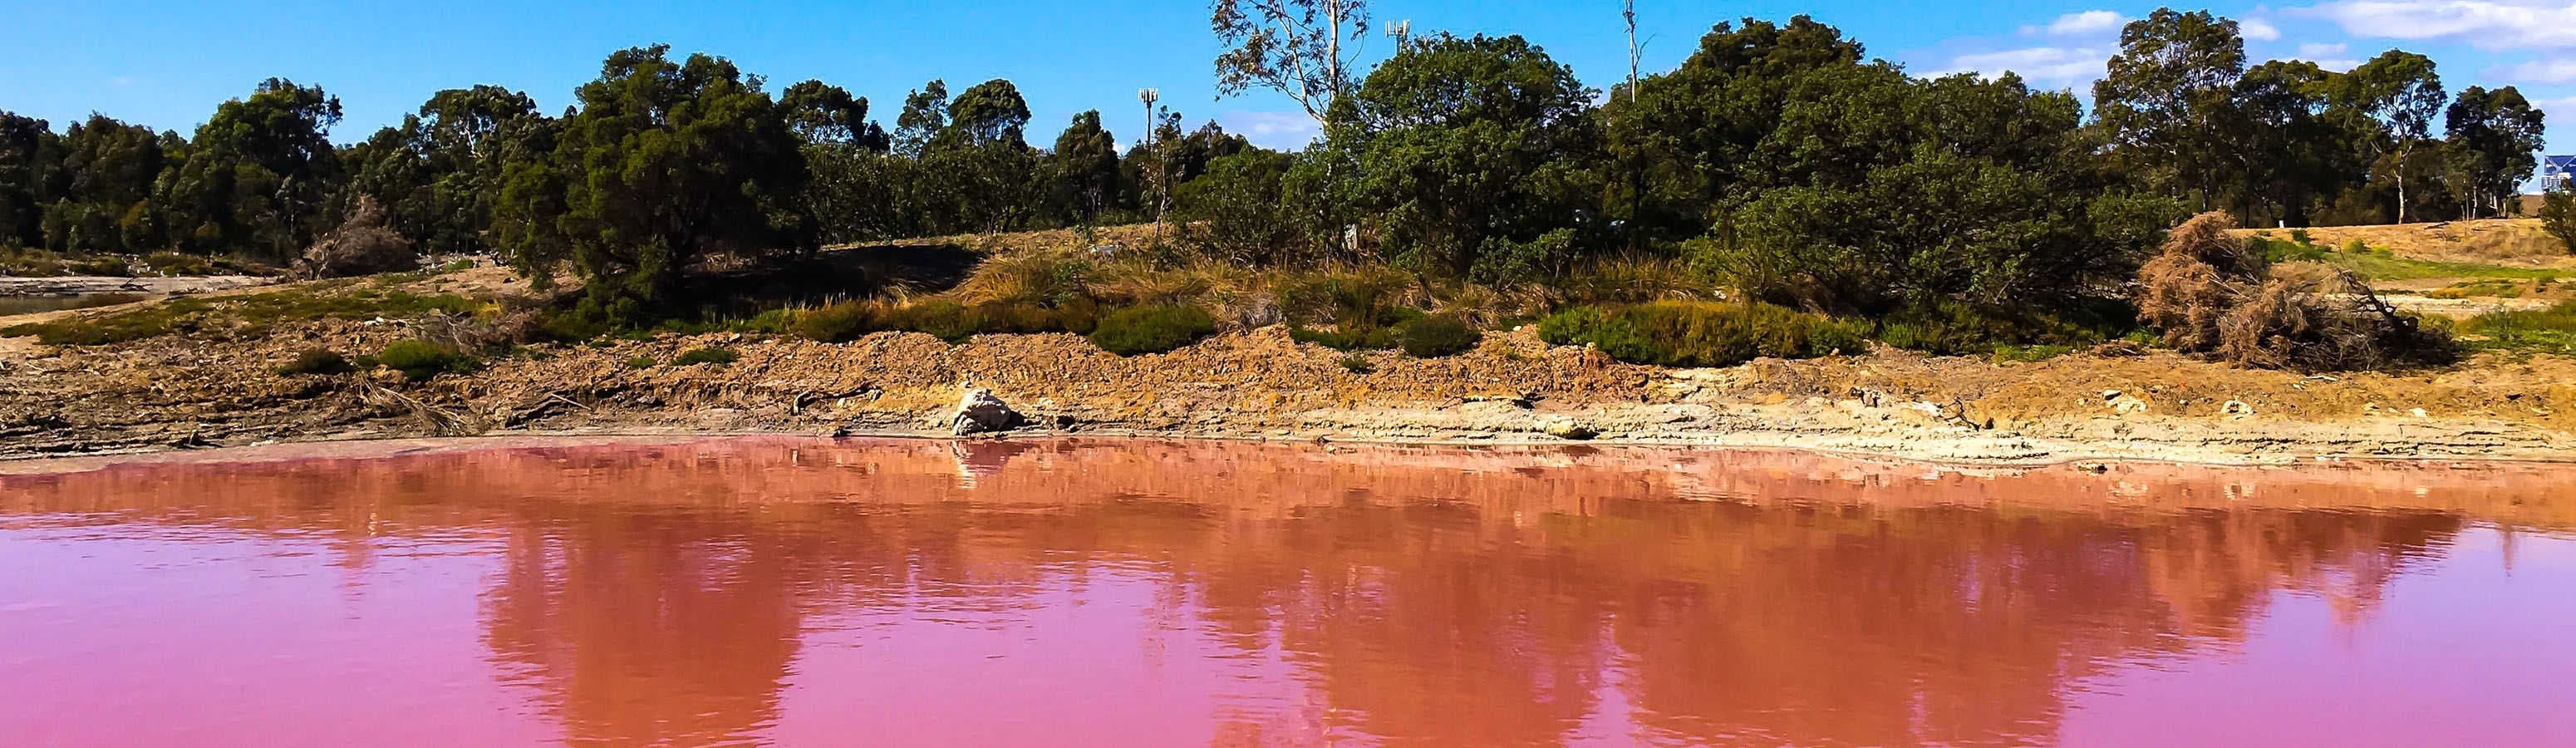 Pink Lake Hilier in Australia deve vedere!